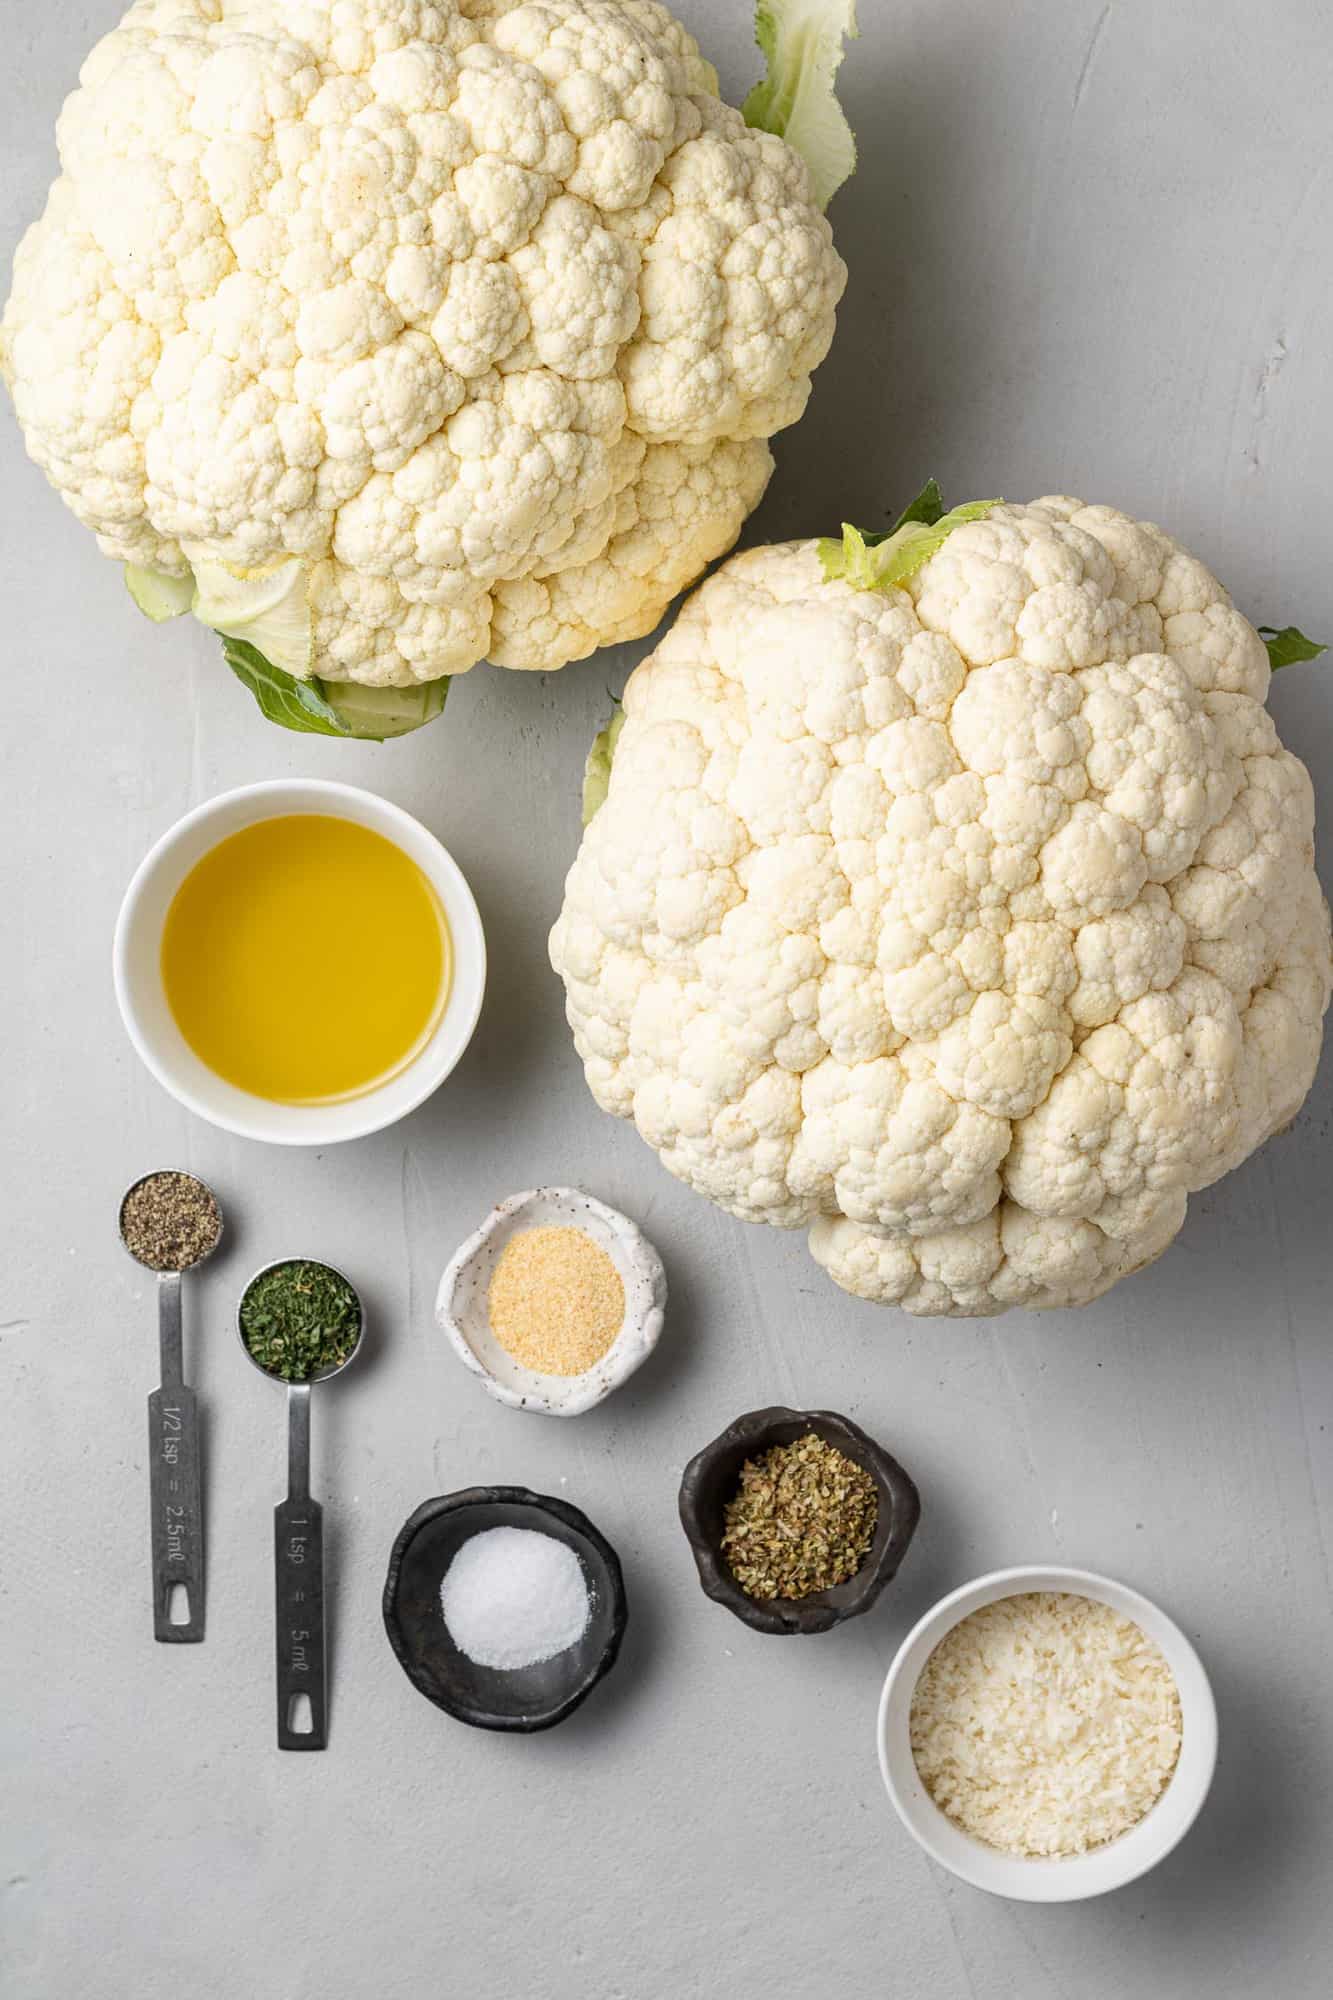 Overhead view of ingredients needed for recipe, including two heads of cauliflower.